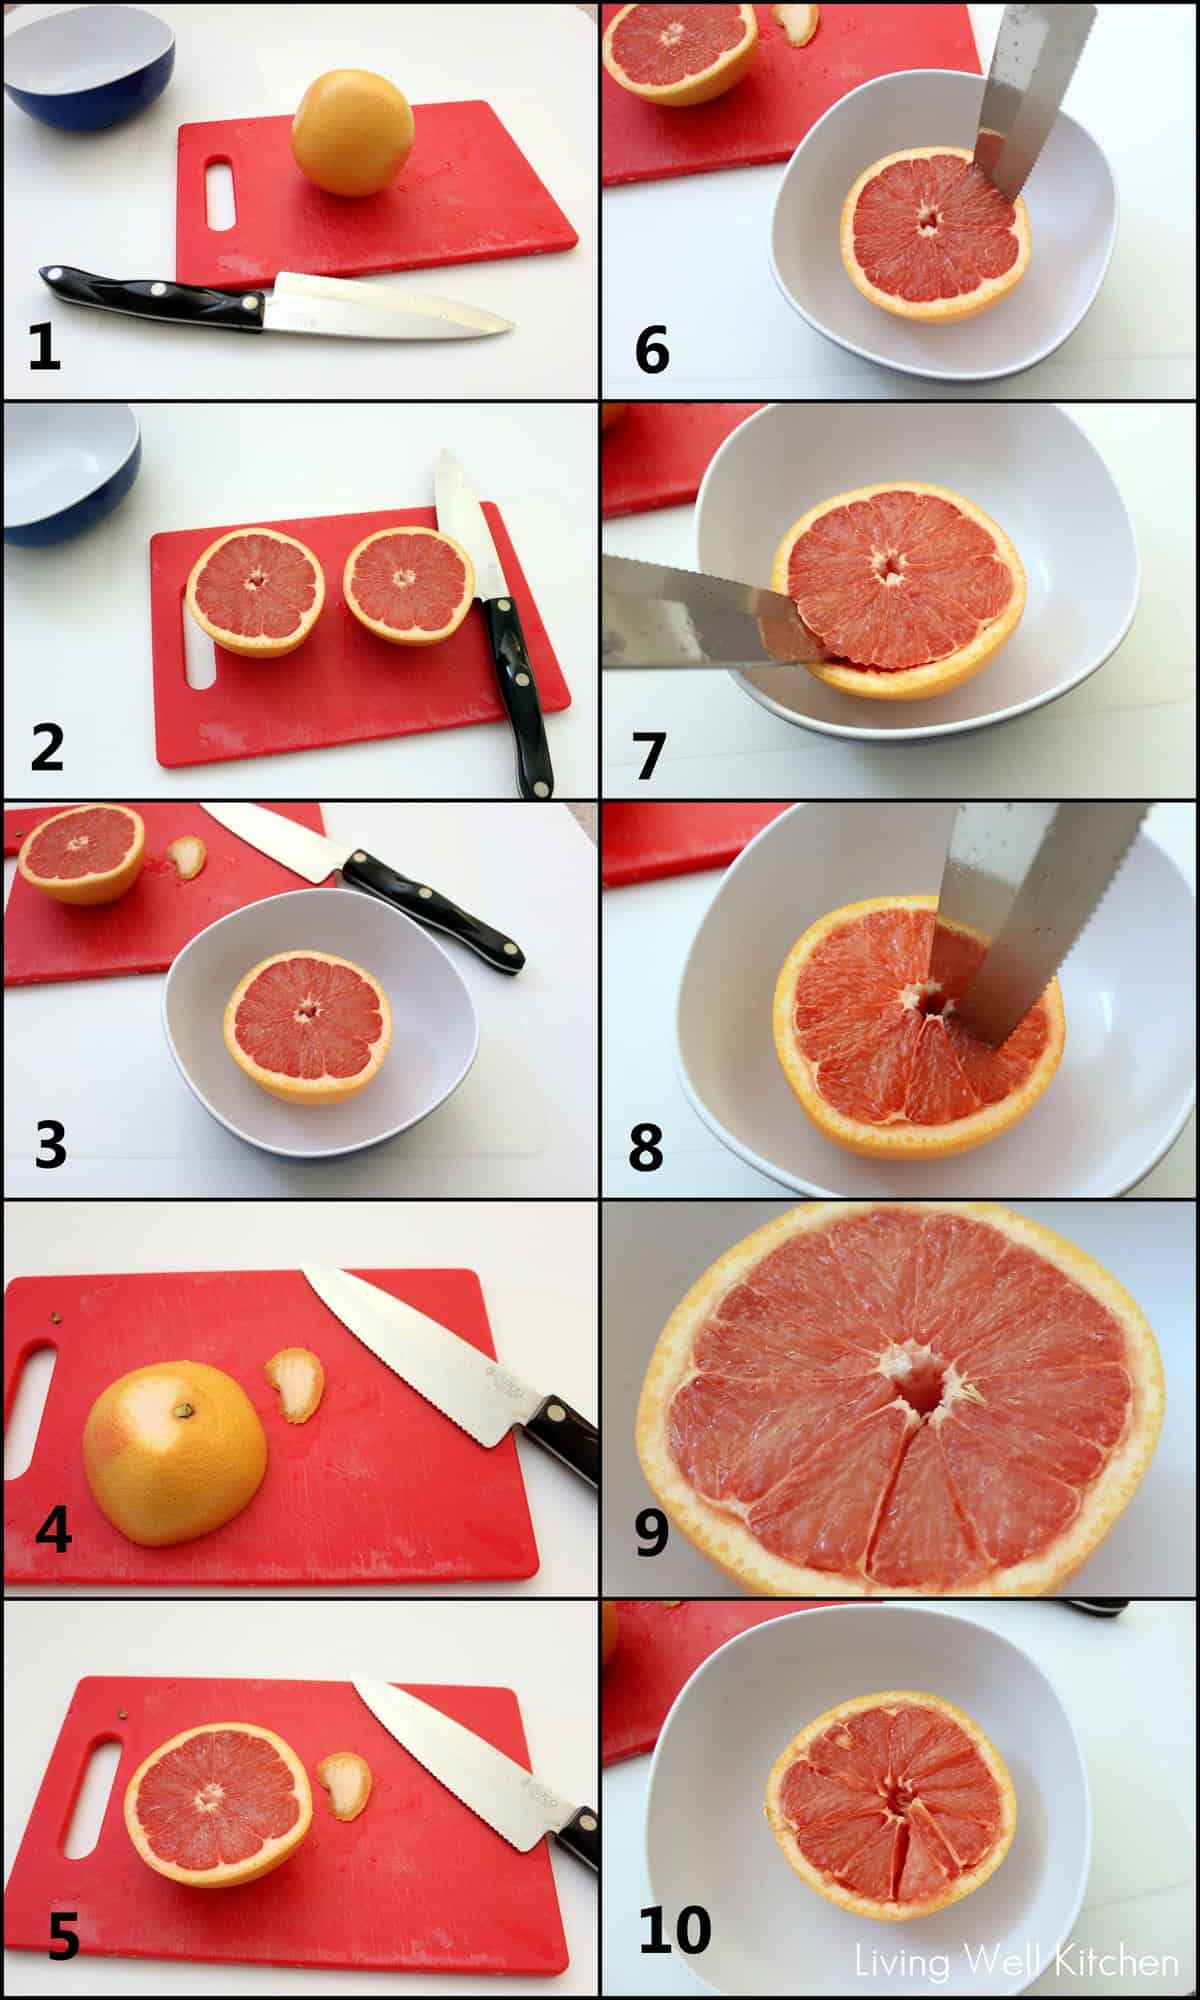 Step by step instructions for cutting a grapefruit from Living Well Kitchen @memeinge